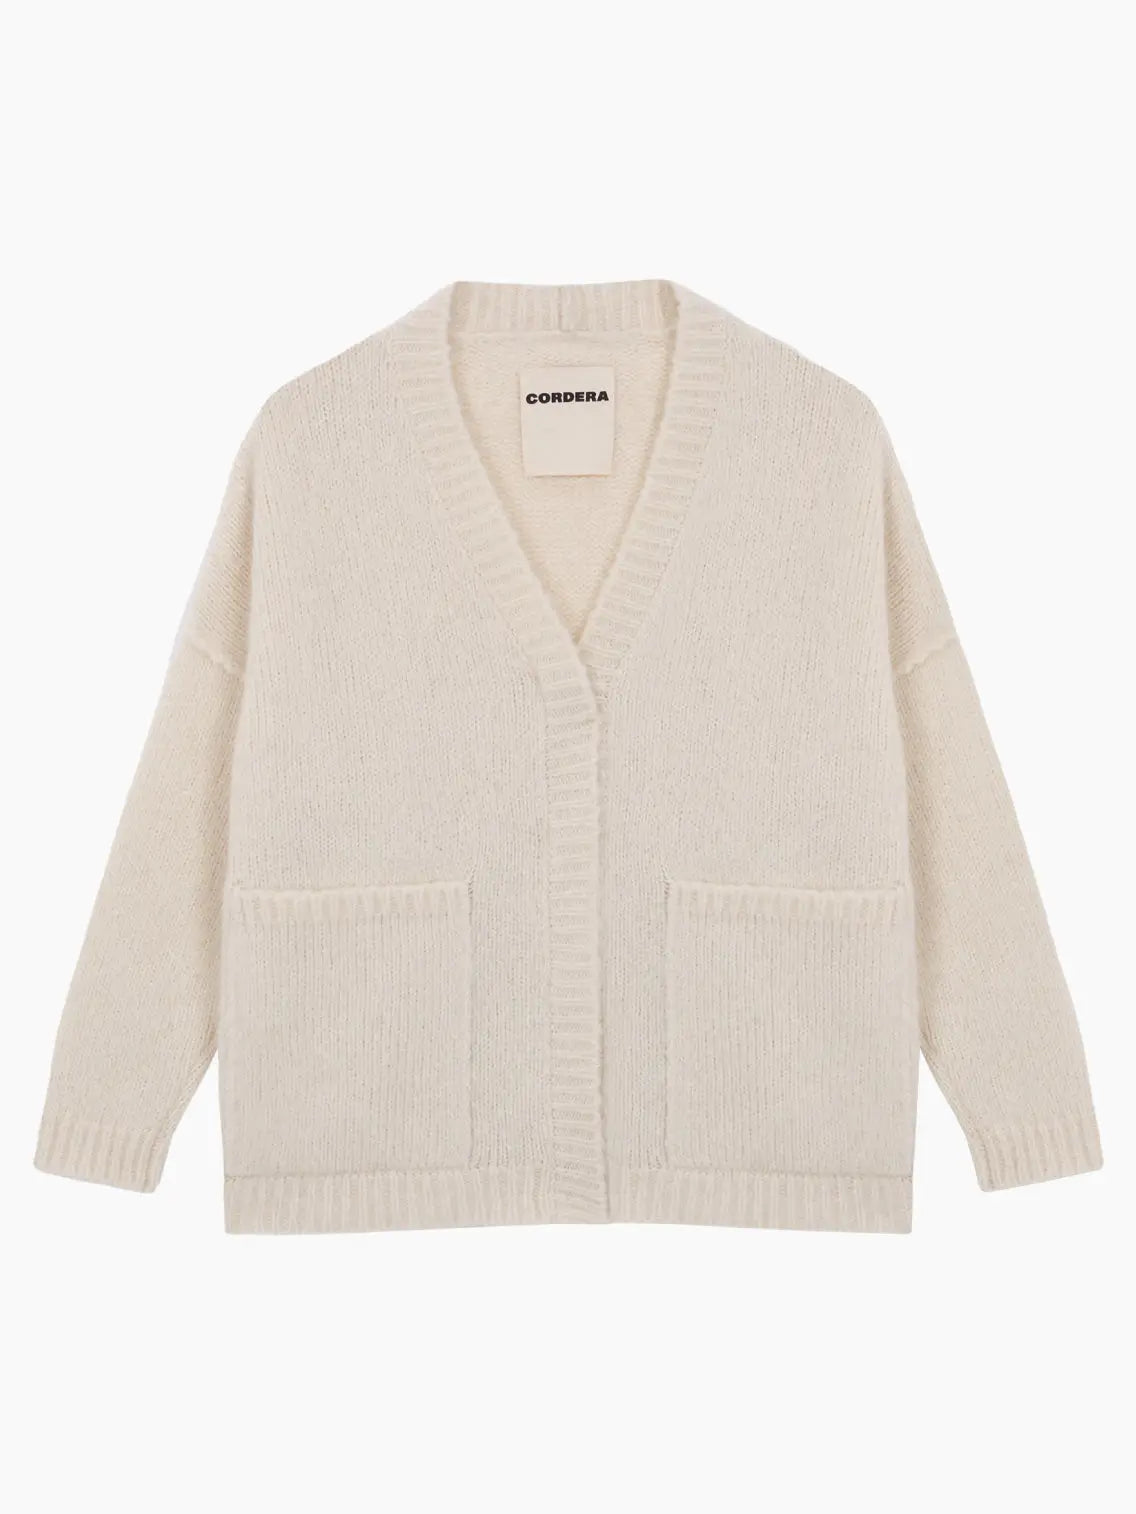 A cream-colored, long-sleeve Baby Alpaca Cardigan Natural displayed on a white background. It features a deep V-neck, front button closure, ribbed cuffs, two front pockets, and a relaxed fit. The label "Cordera" is visible on the inside neckline. Available exclusively at Bassalstore in Barcelona.